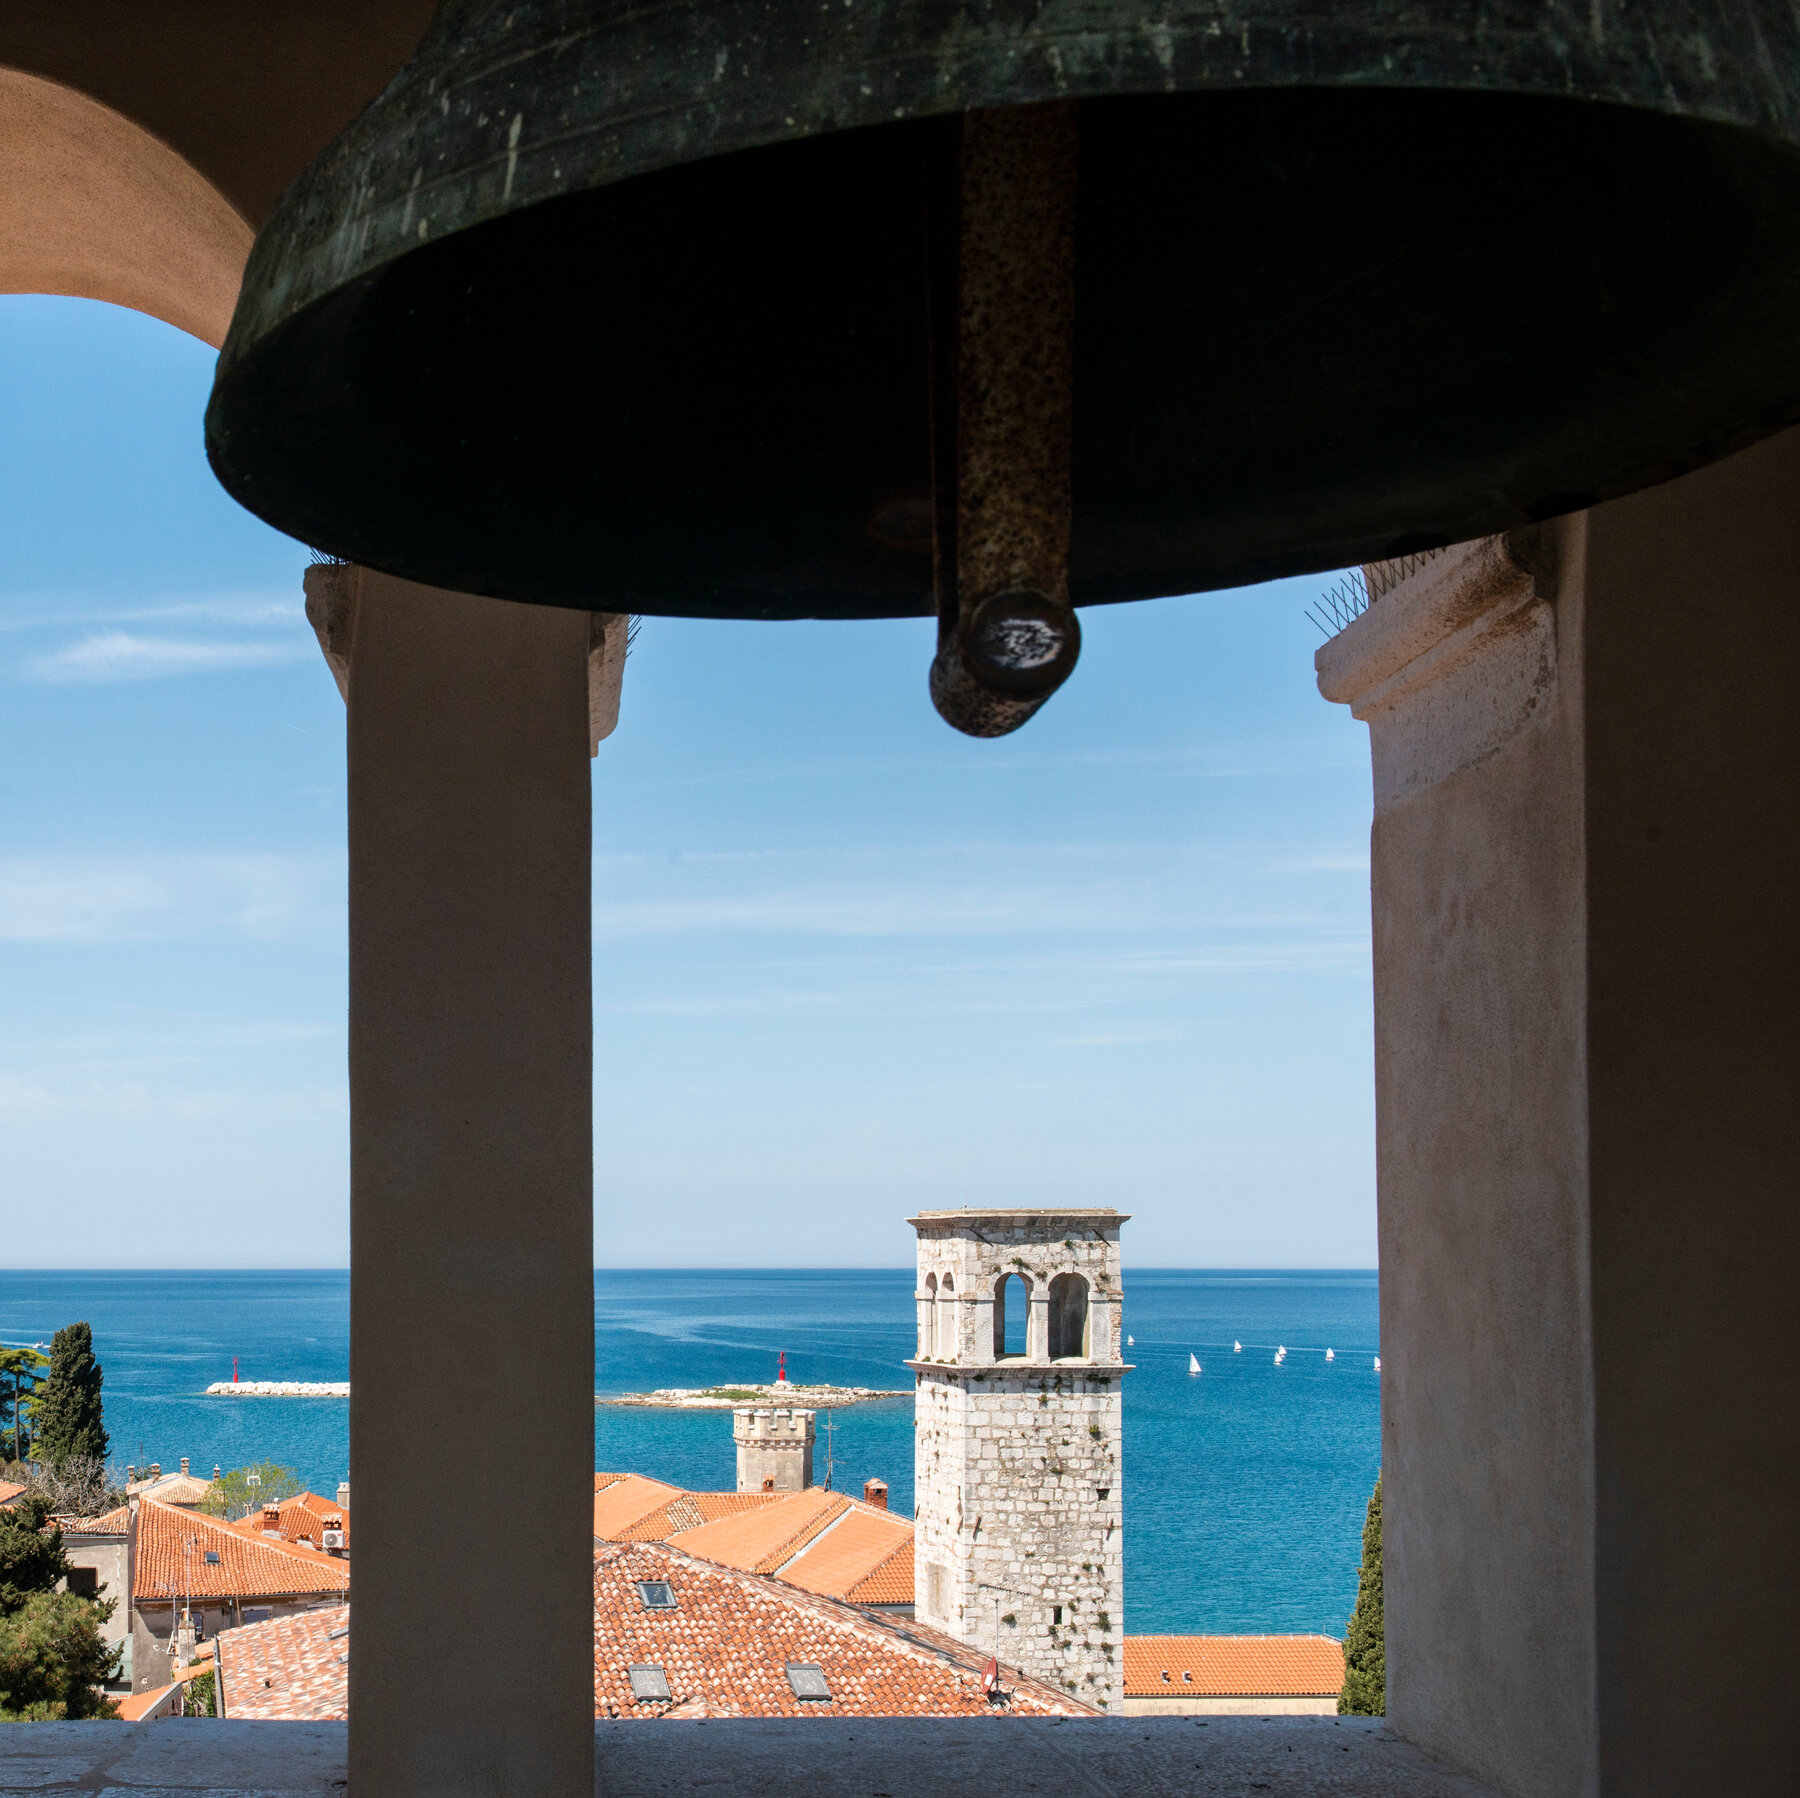 A view of roofs and a sea from a window in a room with large bells.